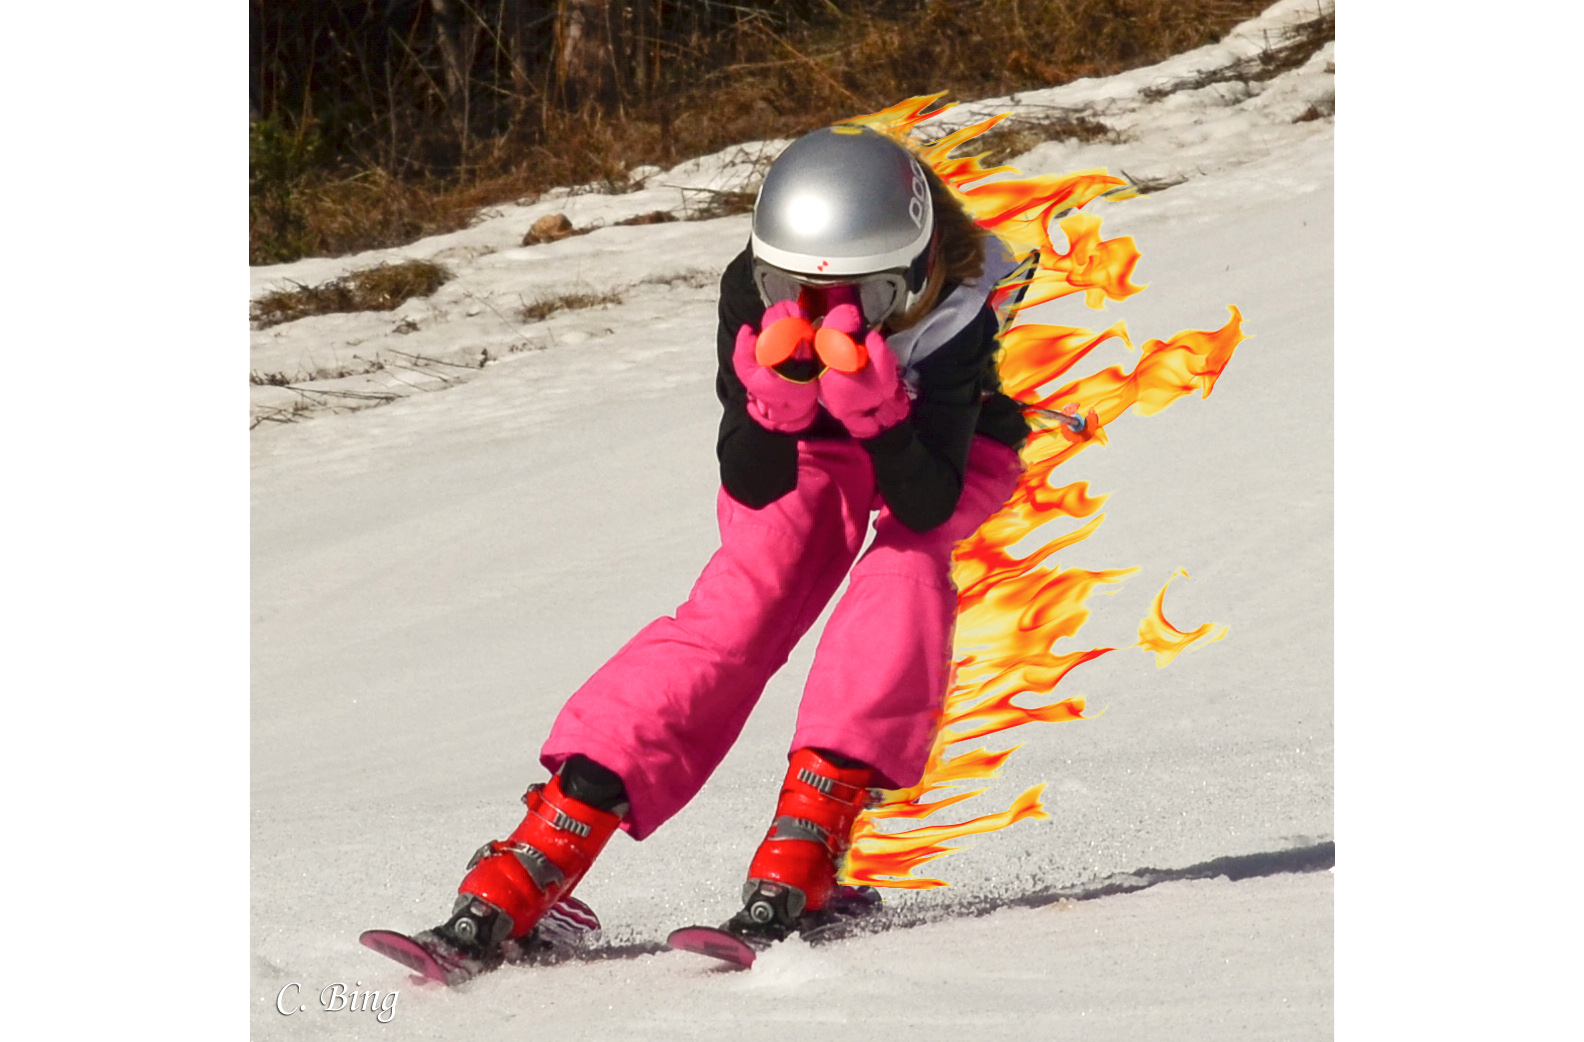 Youth ski racer, photographed by me, then Photo-shopped for use on a flyer